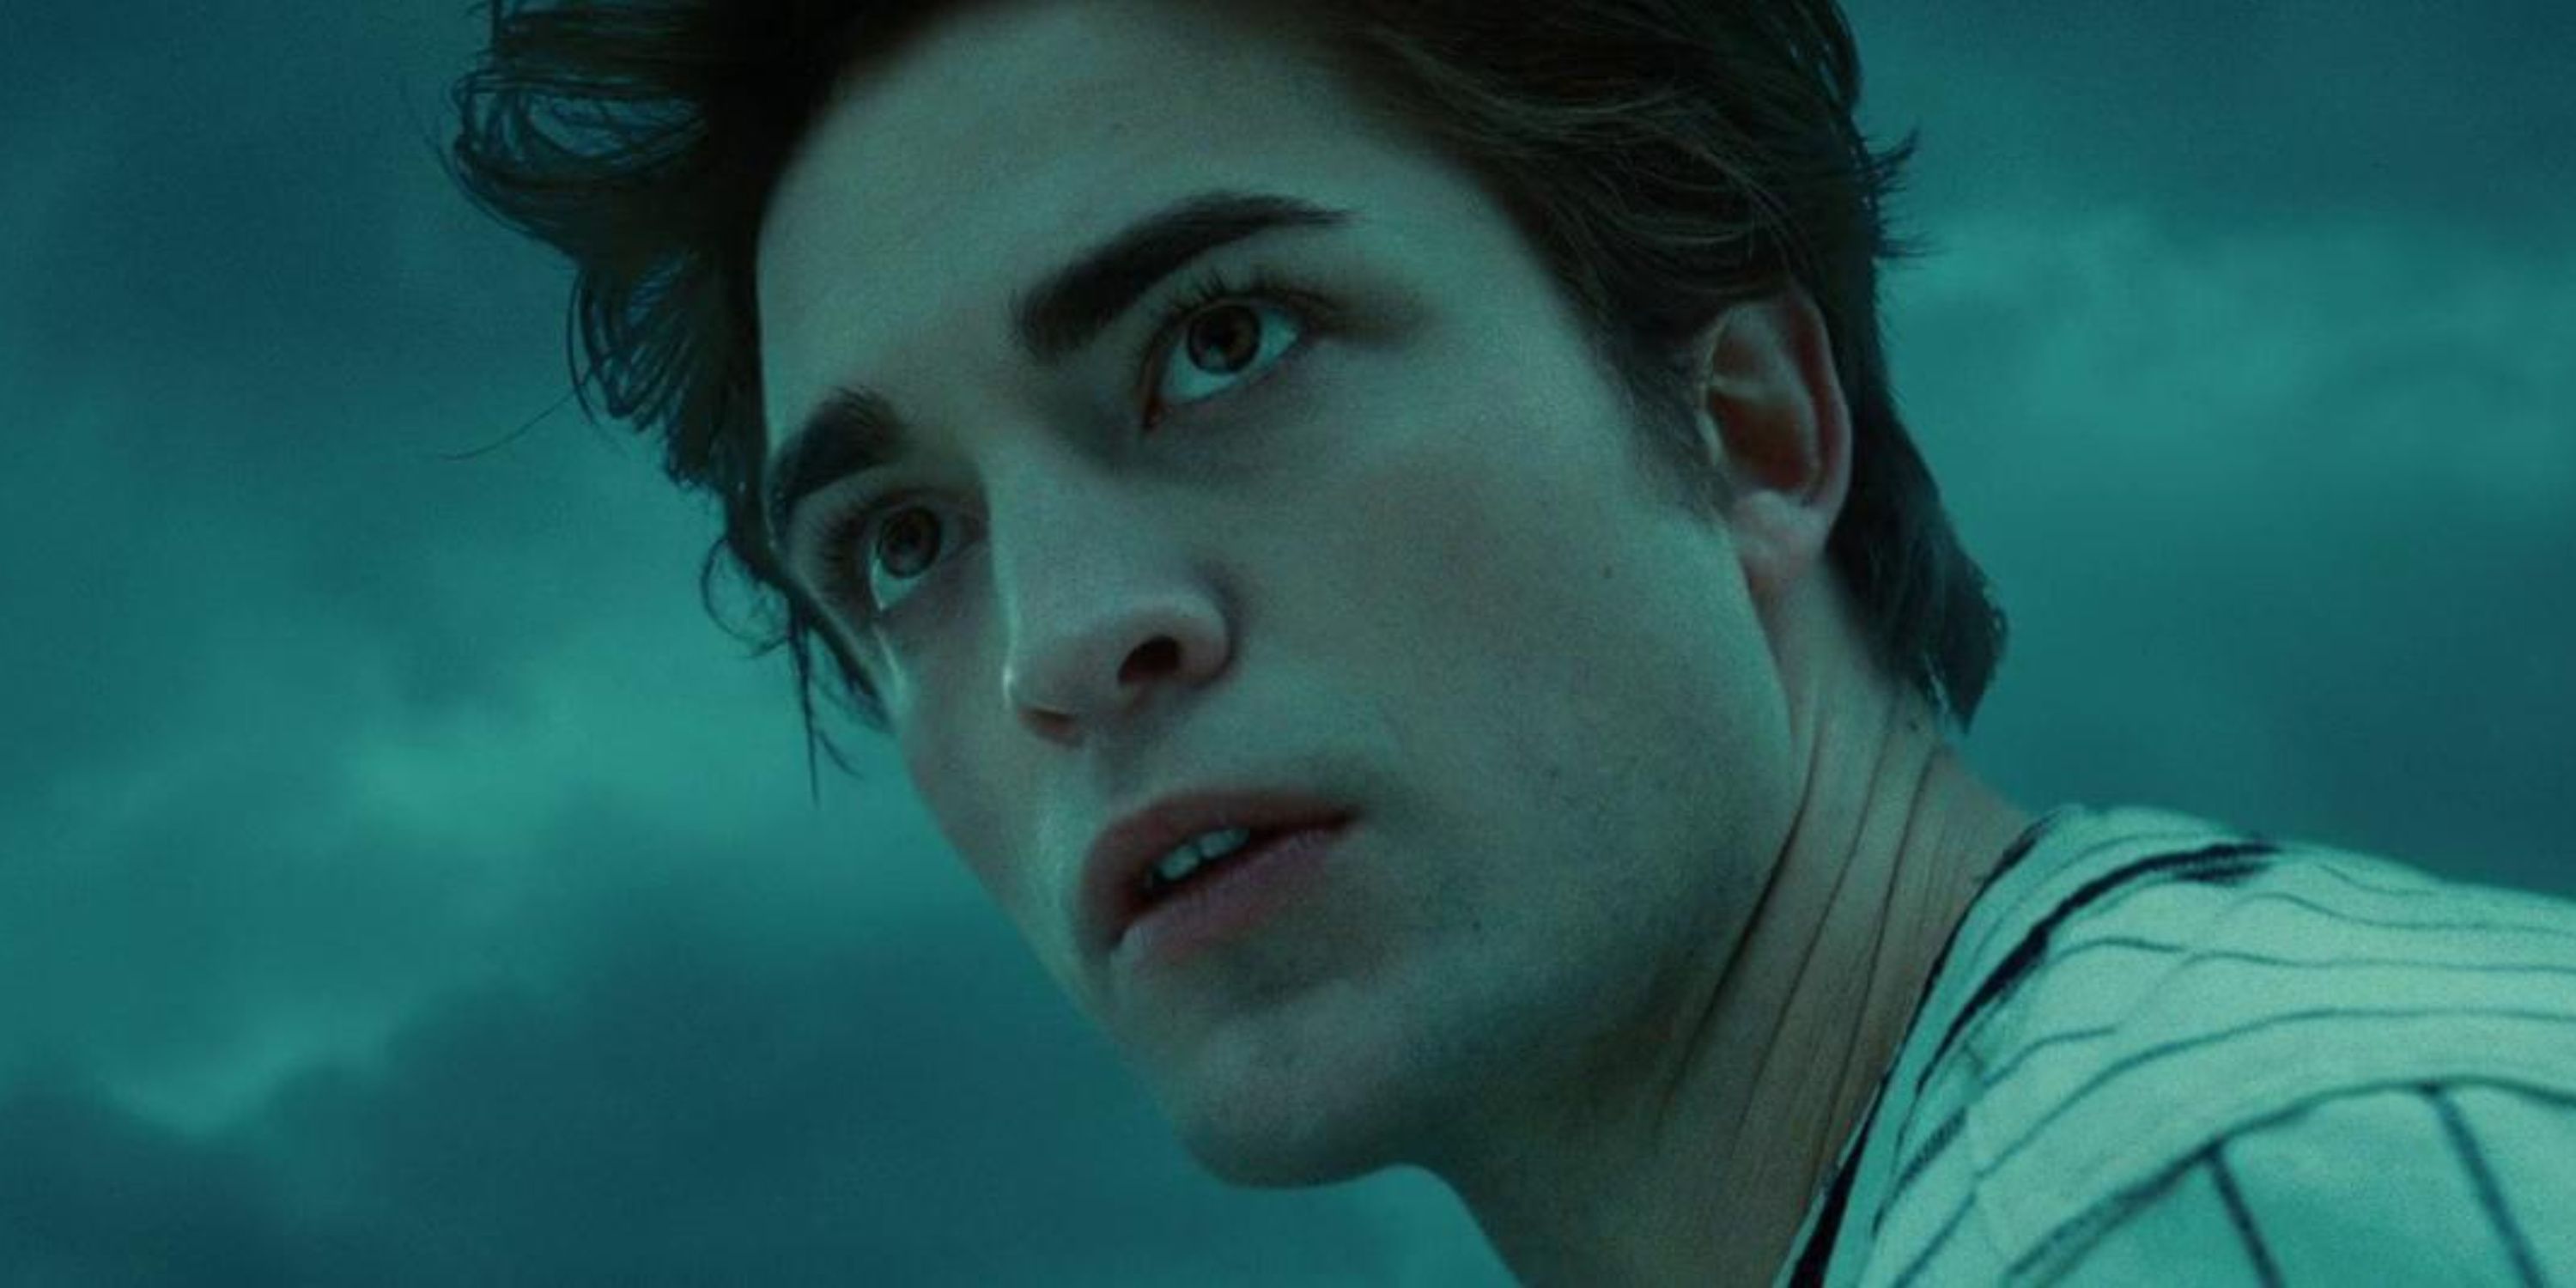 Robert Pattinson as Edward Cullen in 'Twilight', he is a white man with a baseball uniform in a cloudy field.